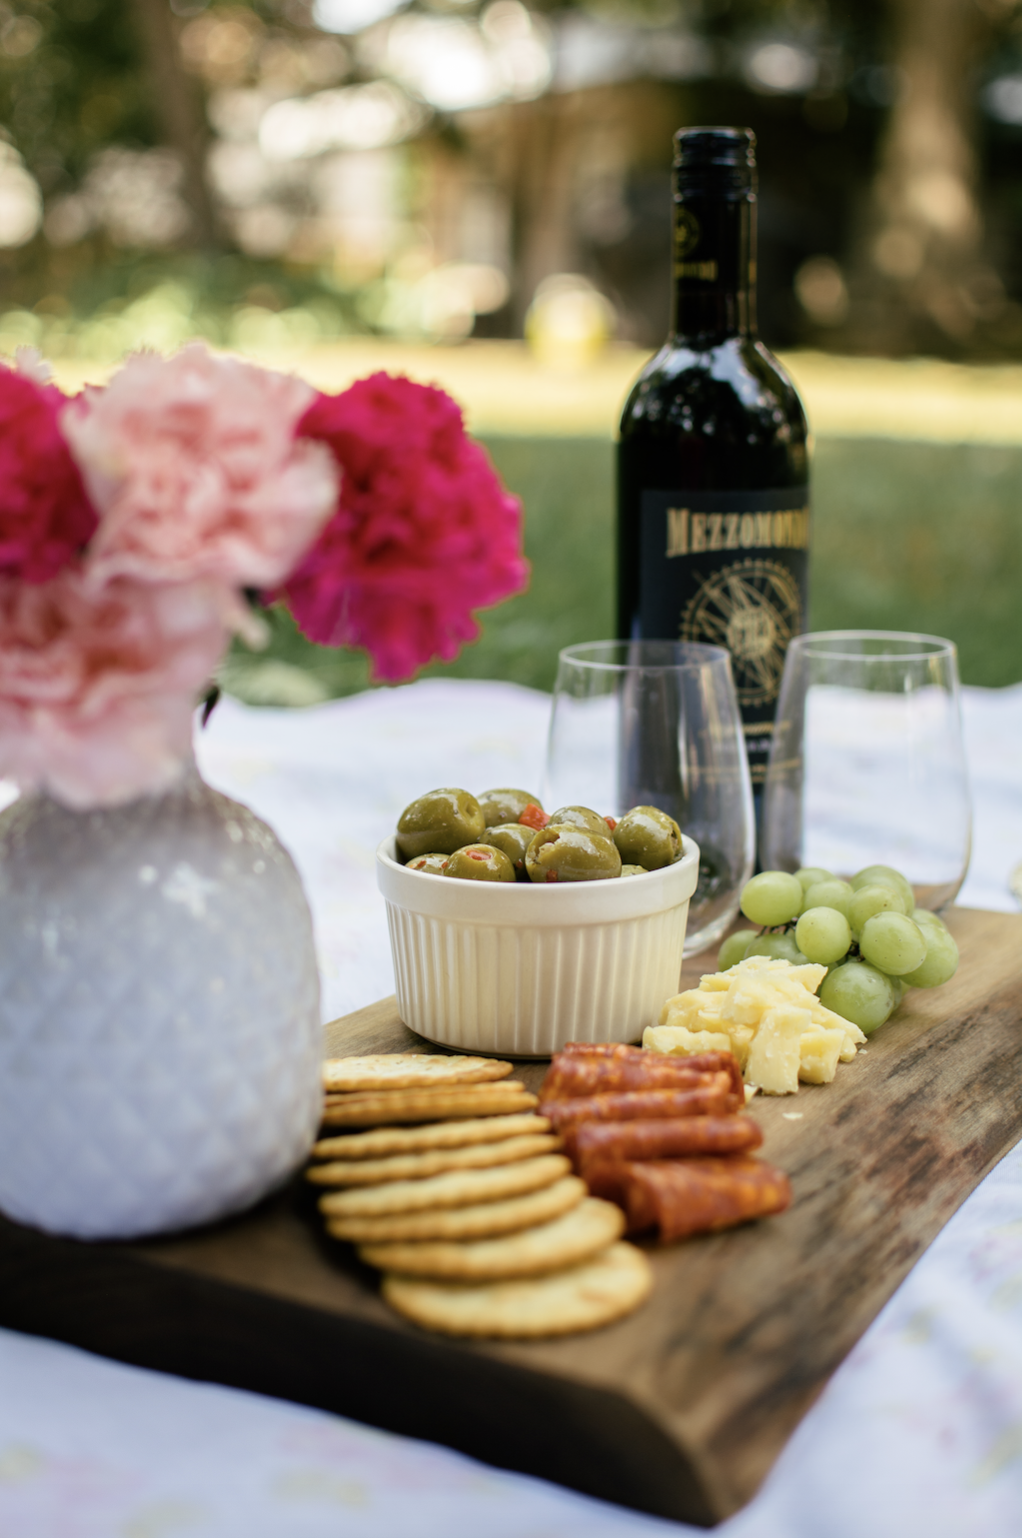 How to Have a Romantic Picnic at Home